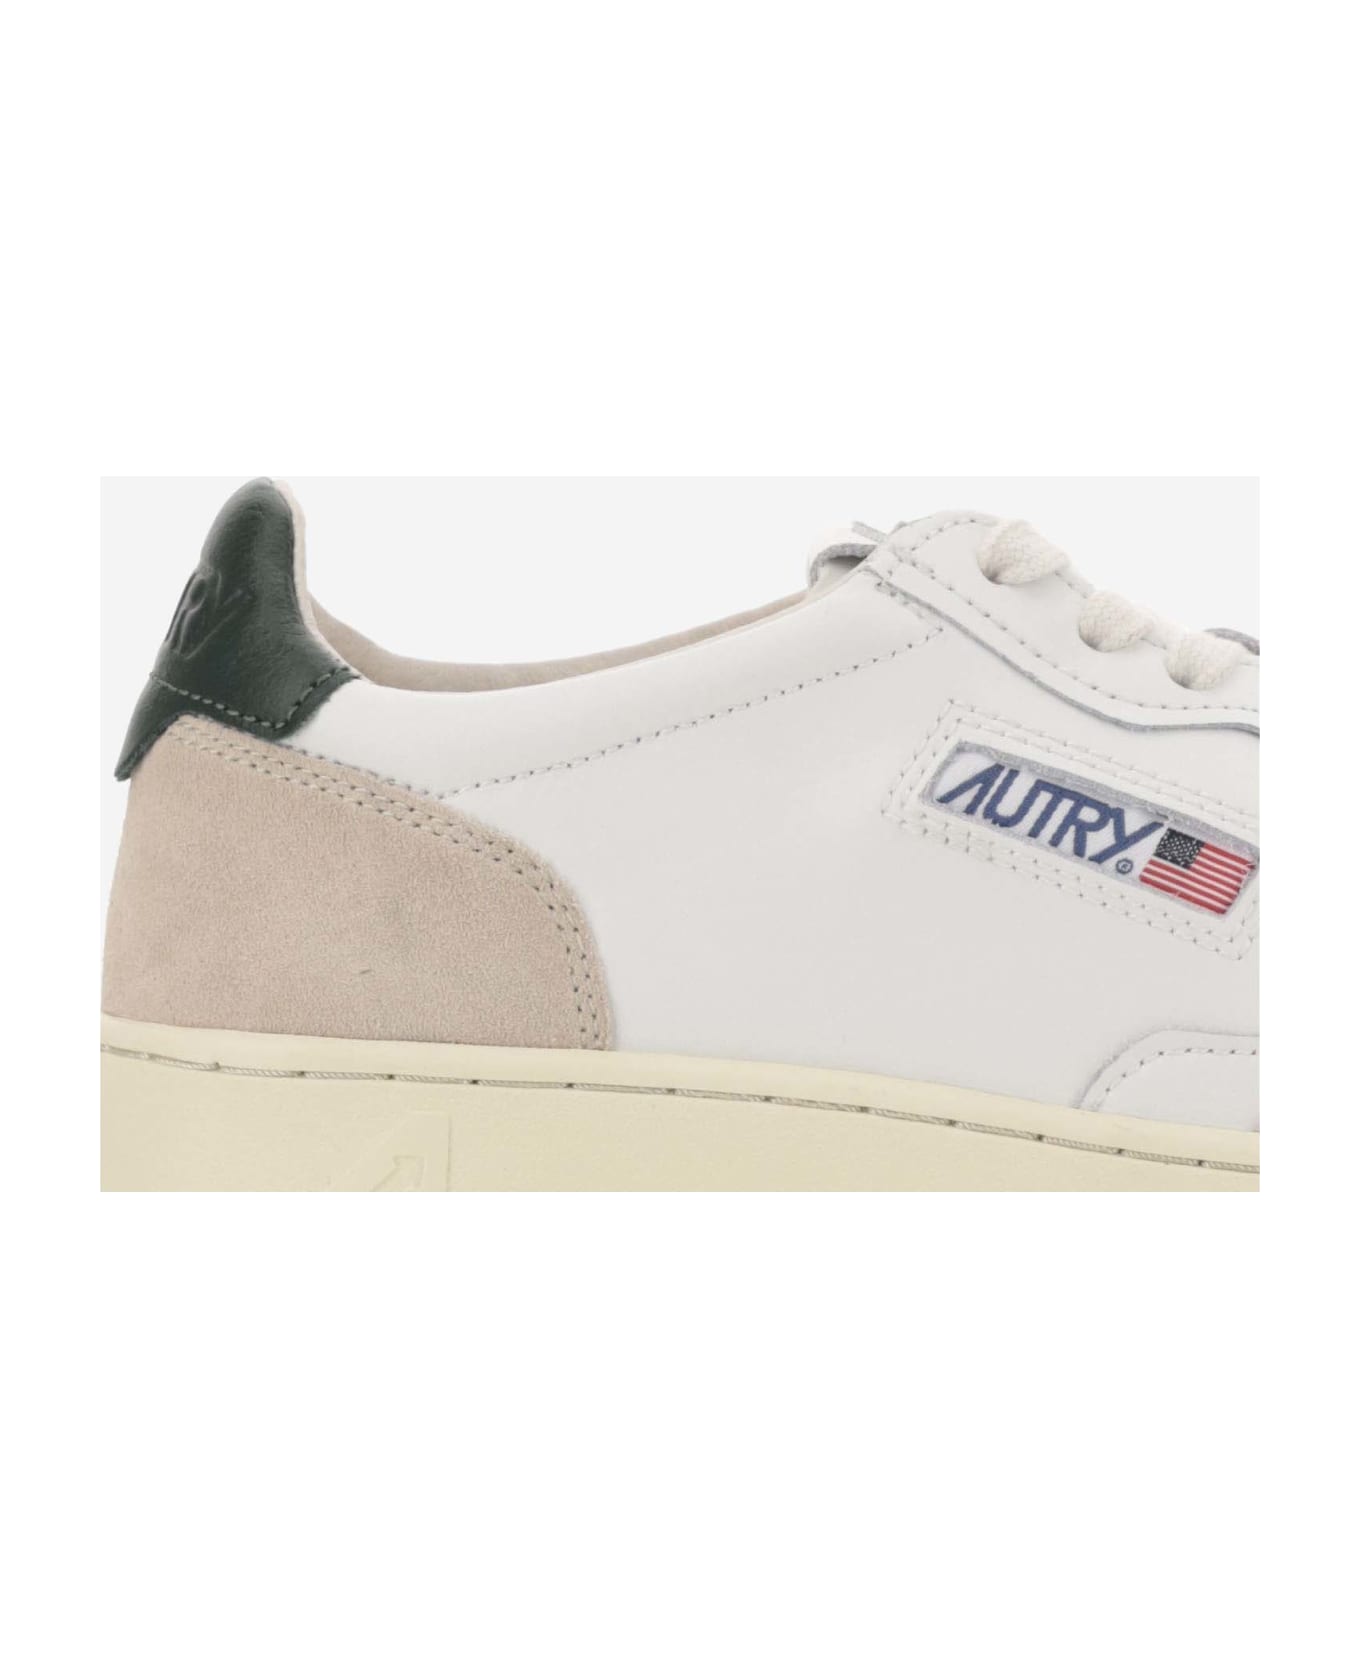 Autry Low Medalist Sneakers - white